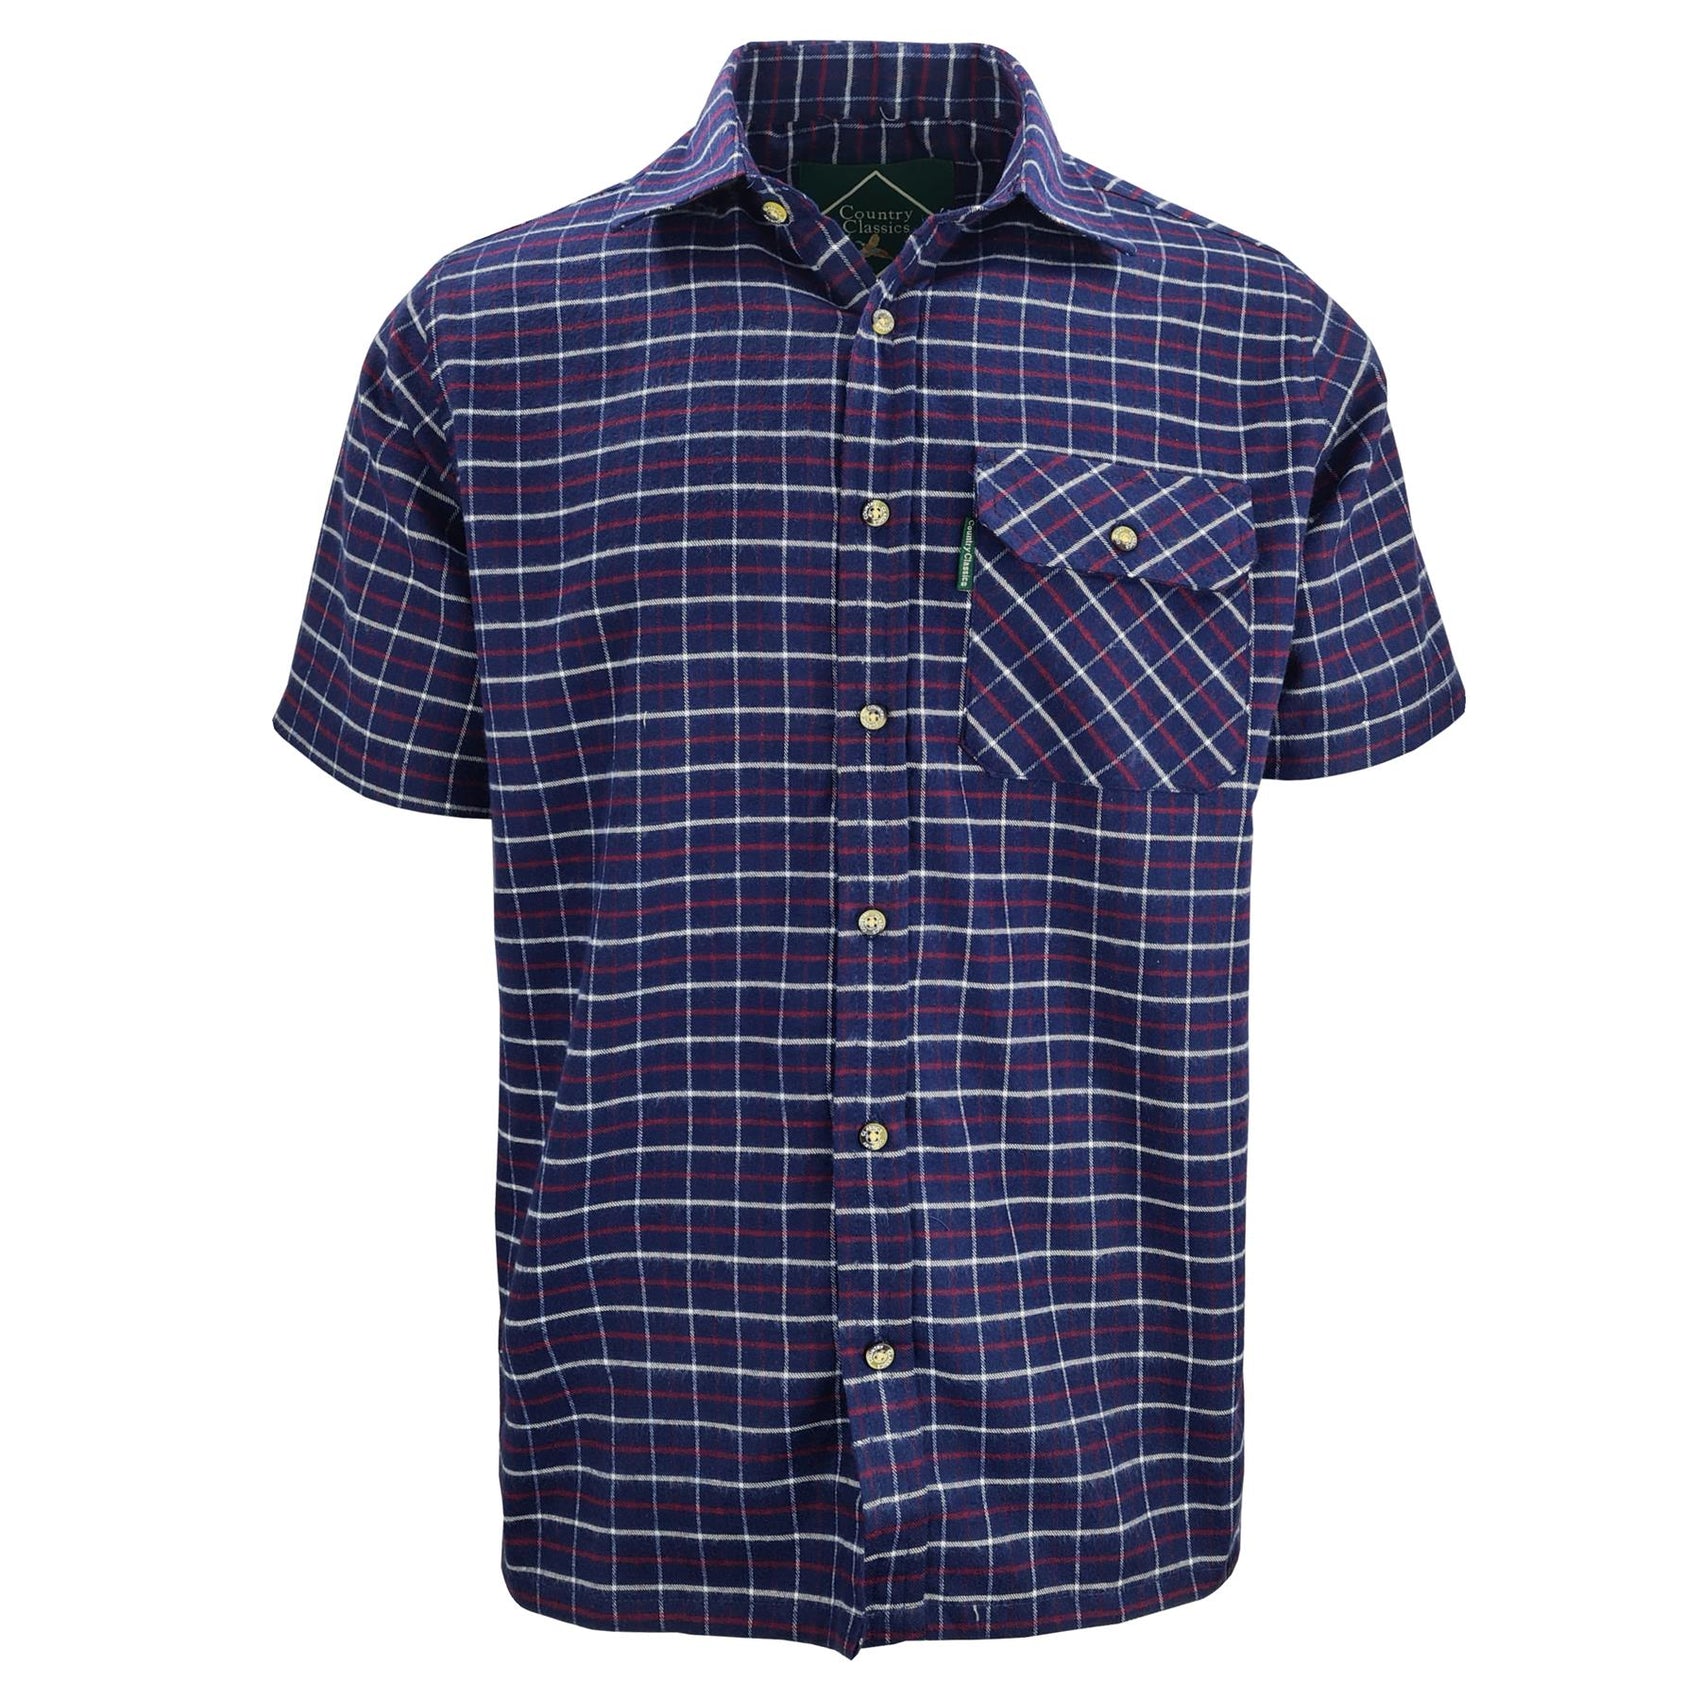 Country Classics Mens Short Sleeve Check Shirt - Fontwell Navy